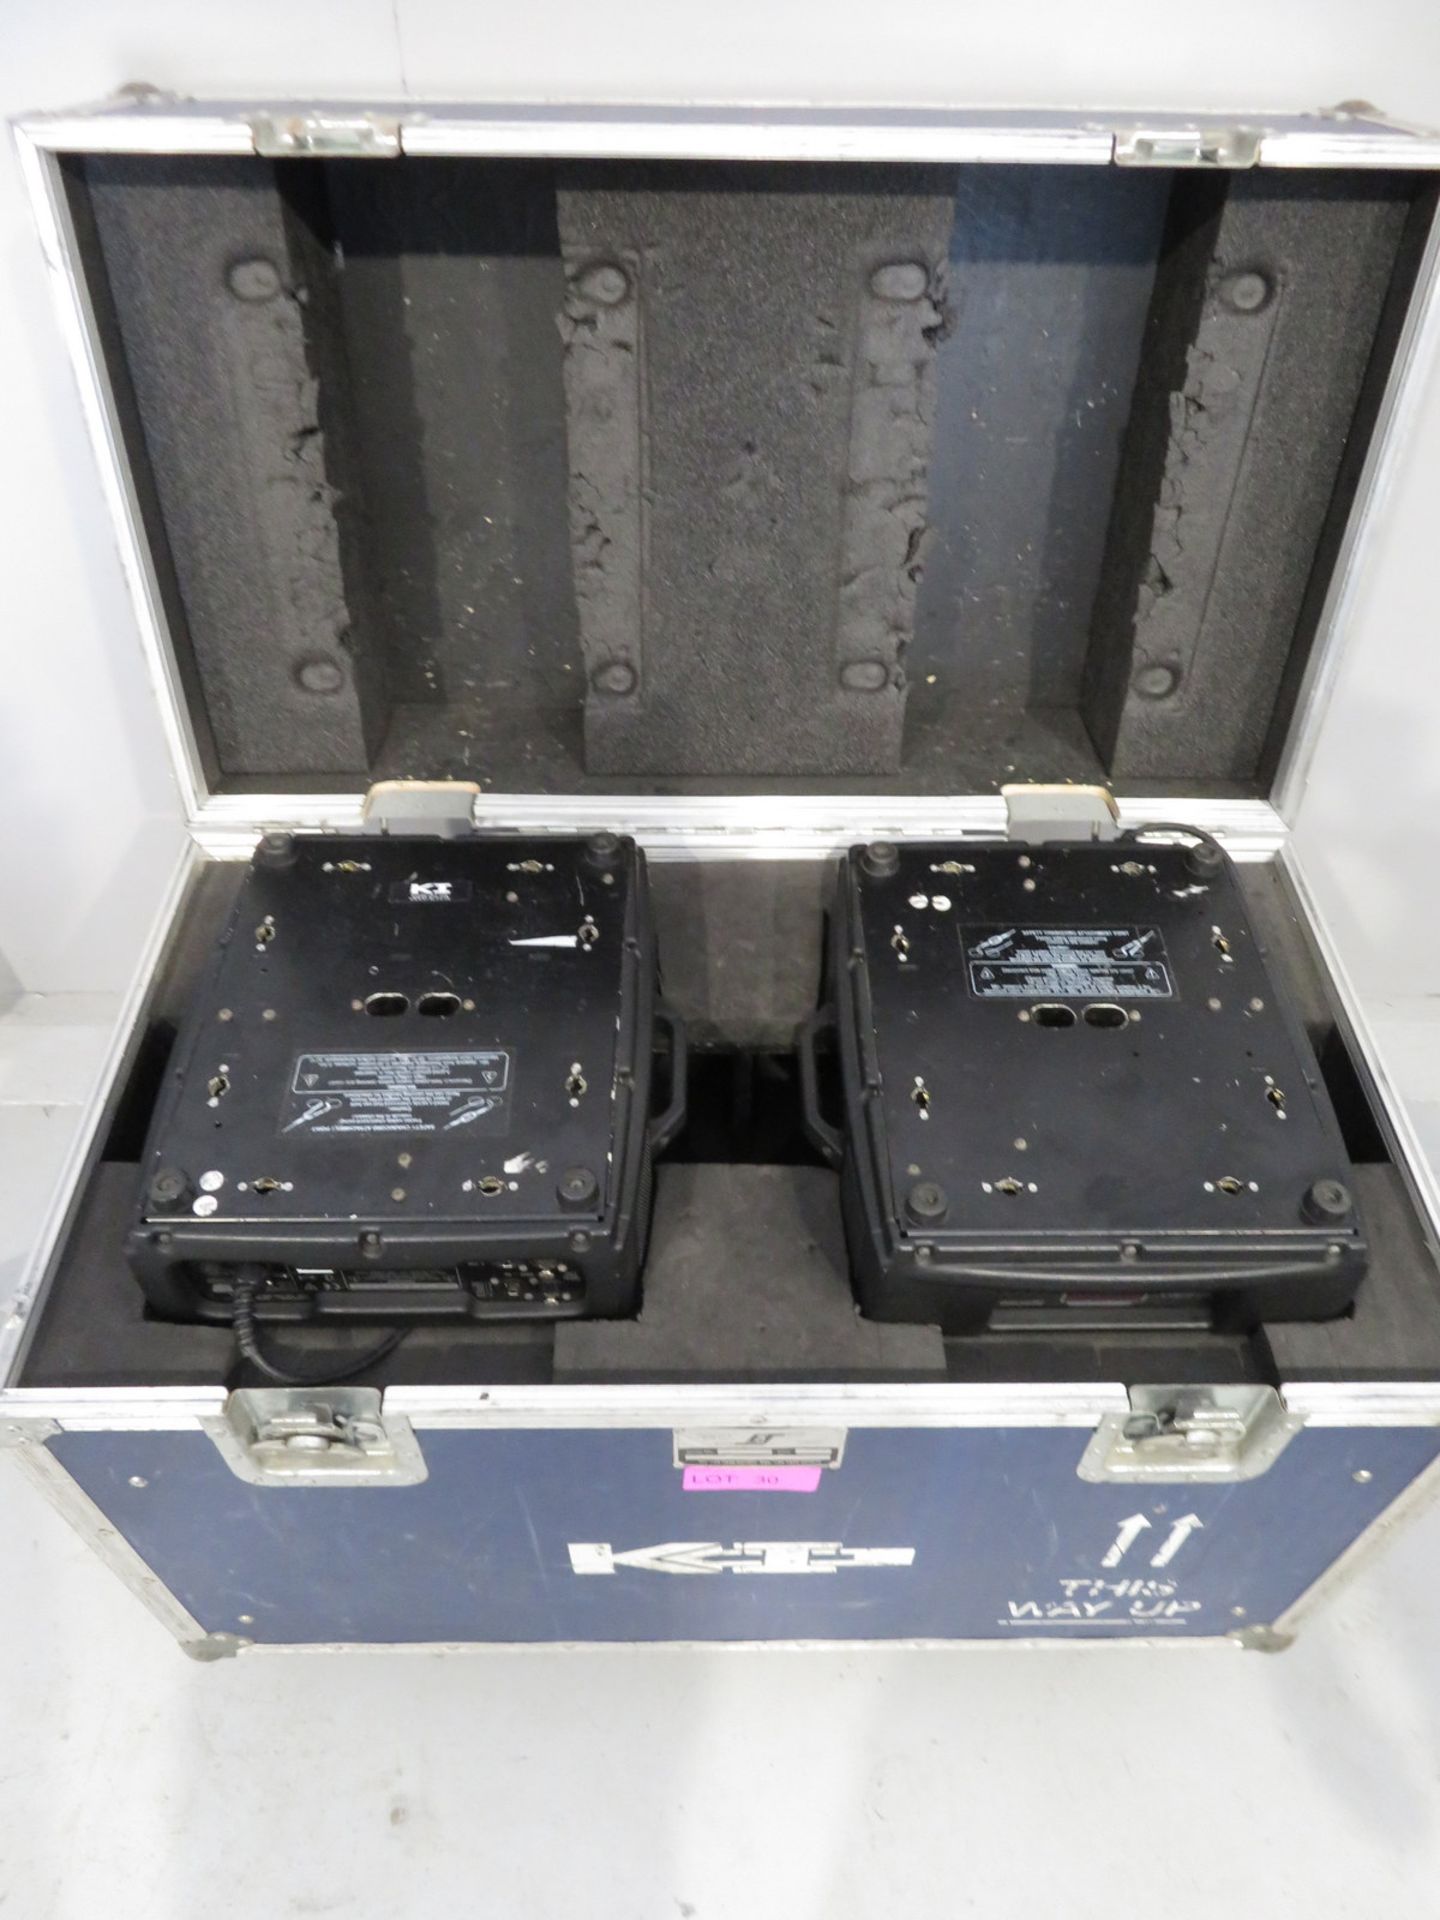 Pair of Robe Colourspot 250 AT Series in flightcase. Includes hanging clamps. Working con - Image 8 of 9